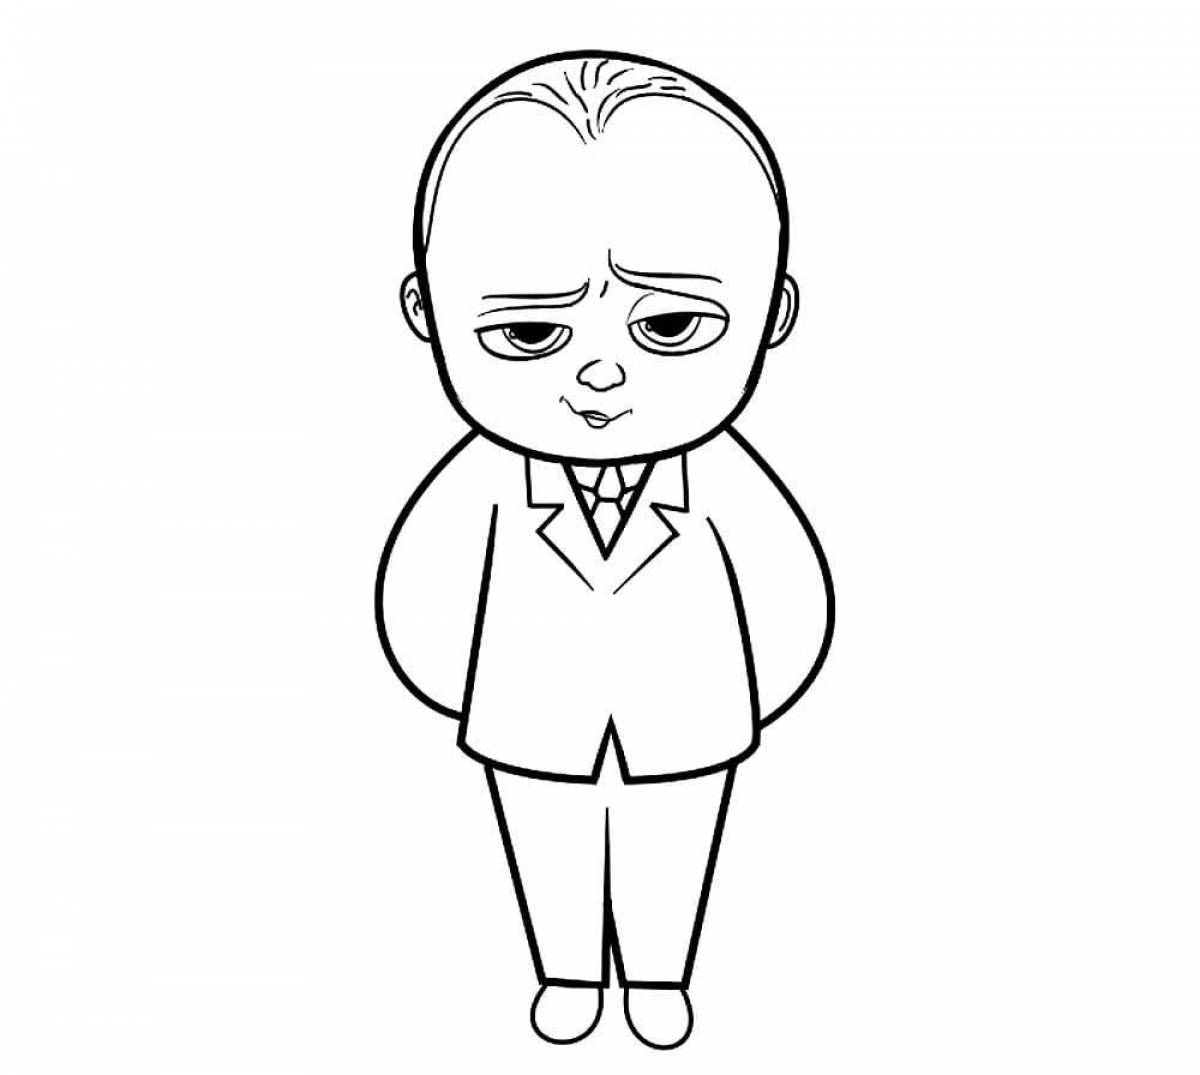 Boss baby coloring book